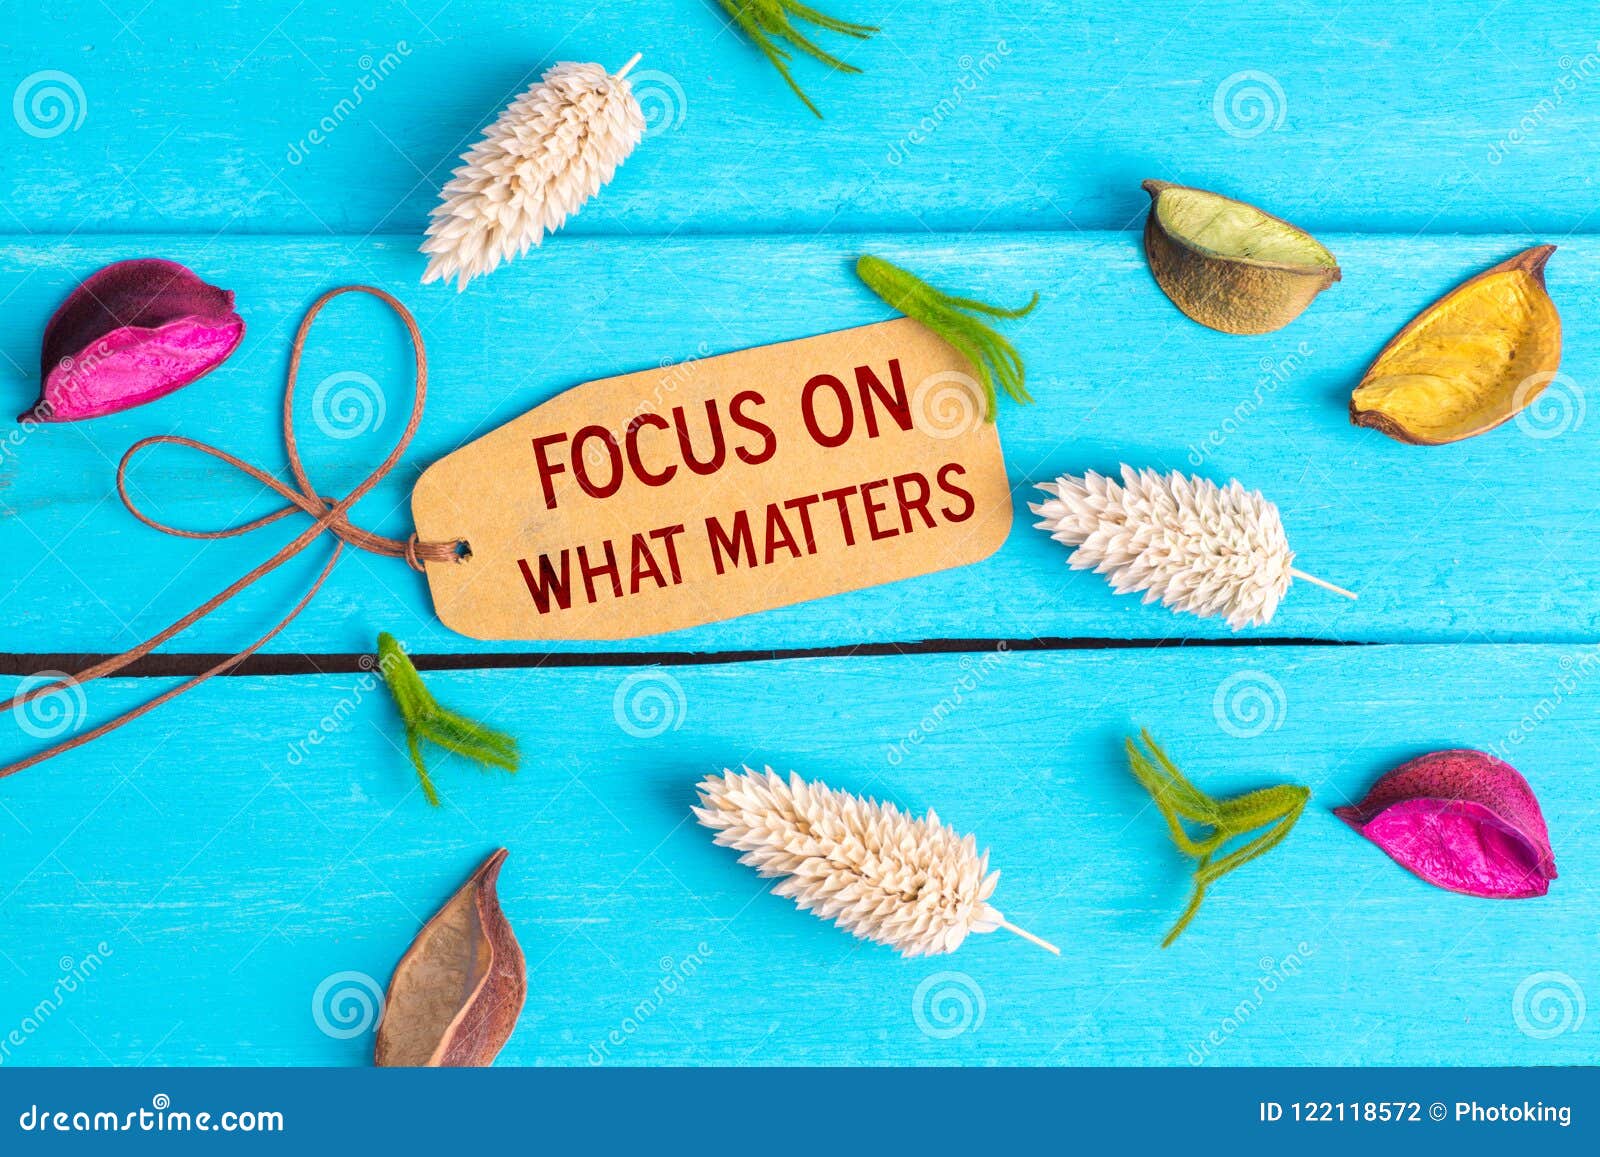 focus on what matters text on paper tag